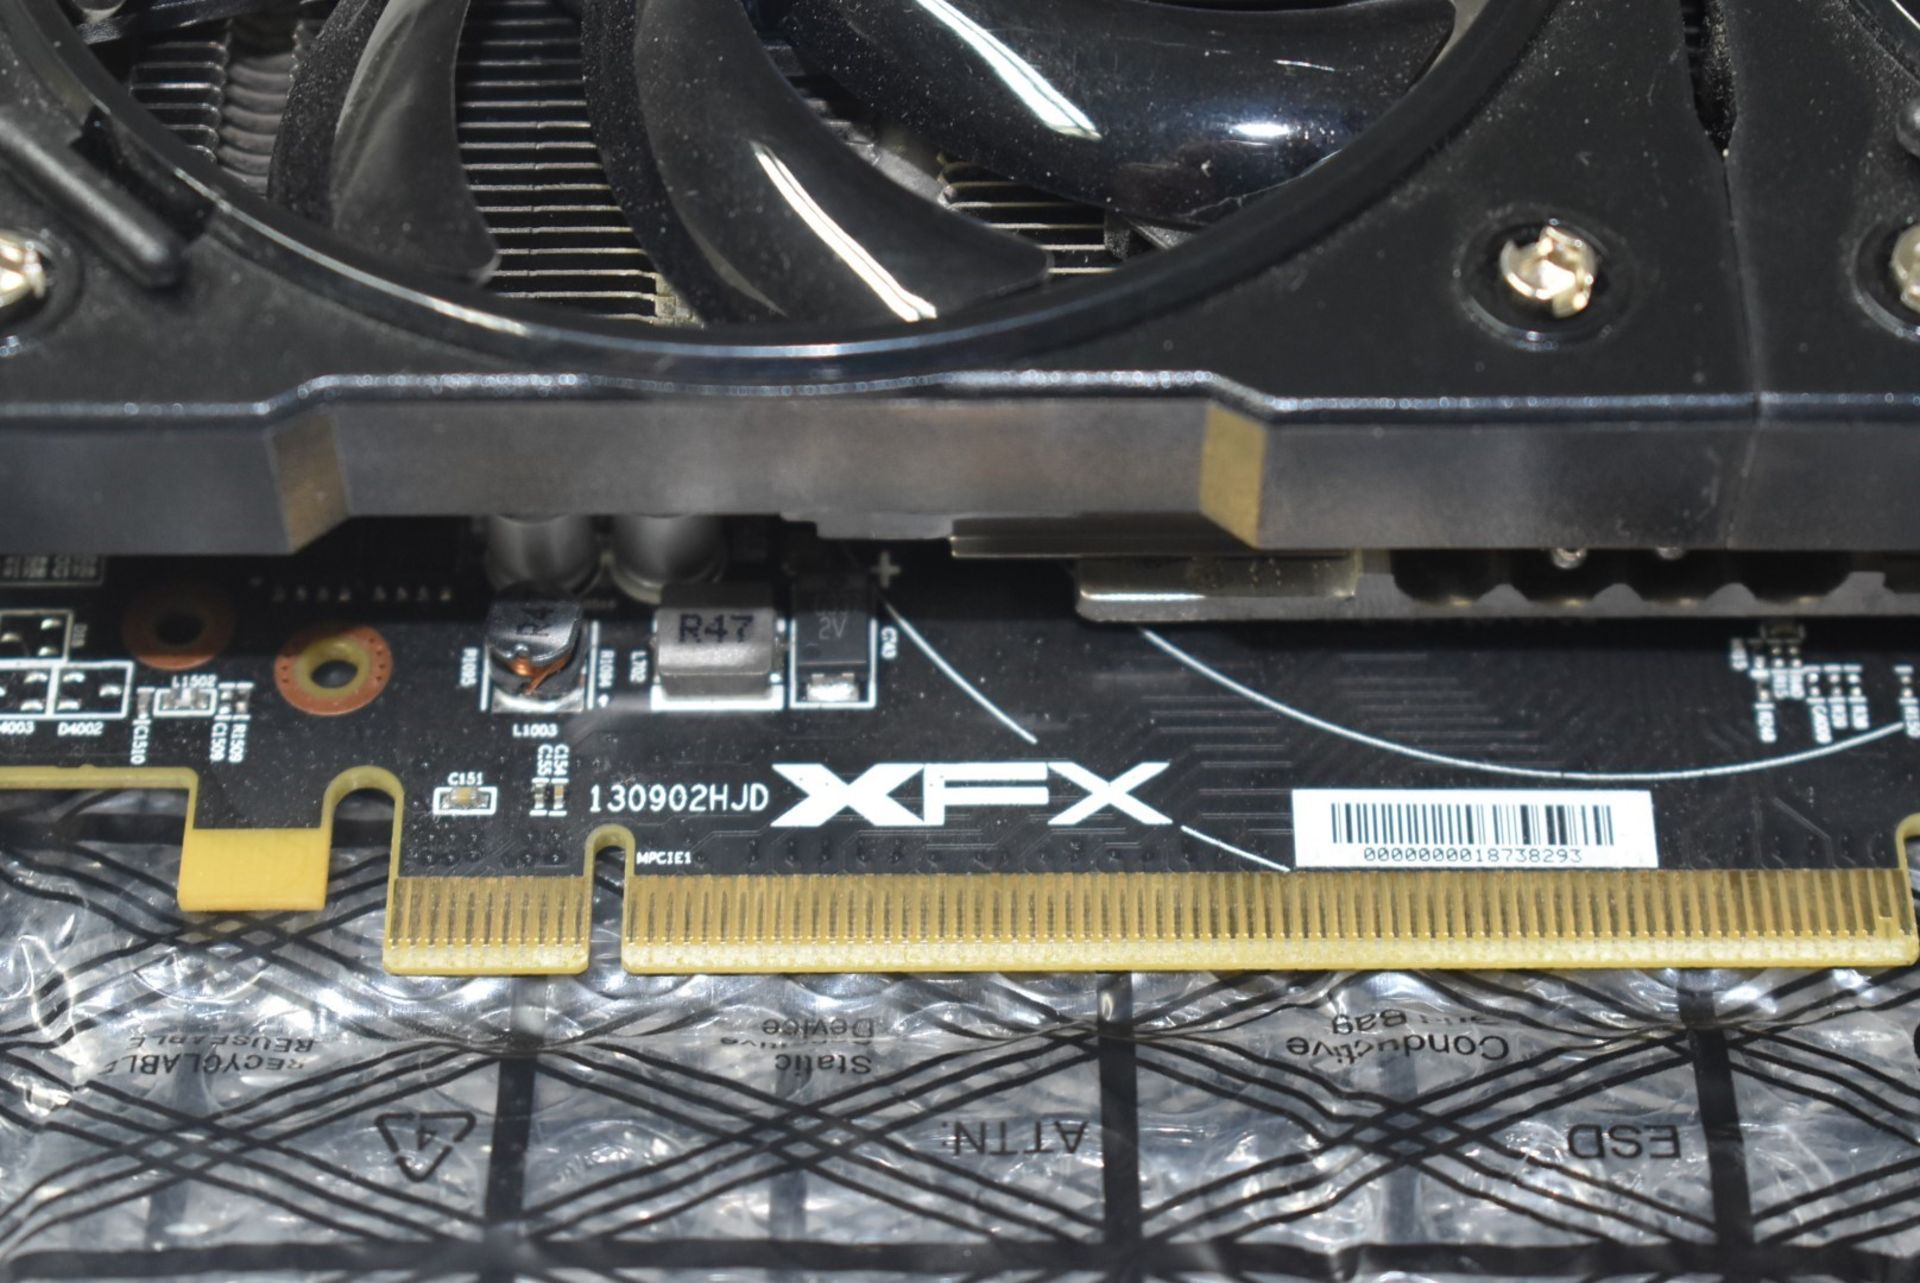 3 x Graphics Cards For Desktop Computers - Includes 1 x Radeon 7790 1GB, 1 x GT730 4GB and 1 x - Image 3 of 7